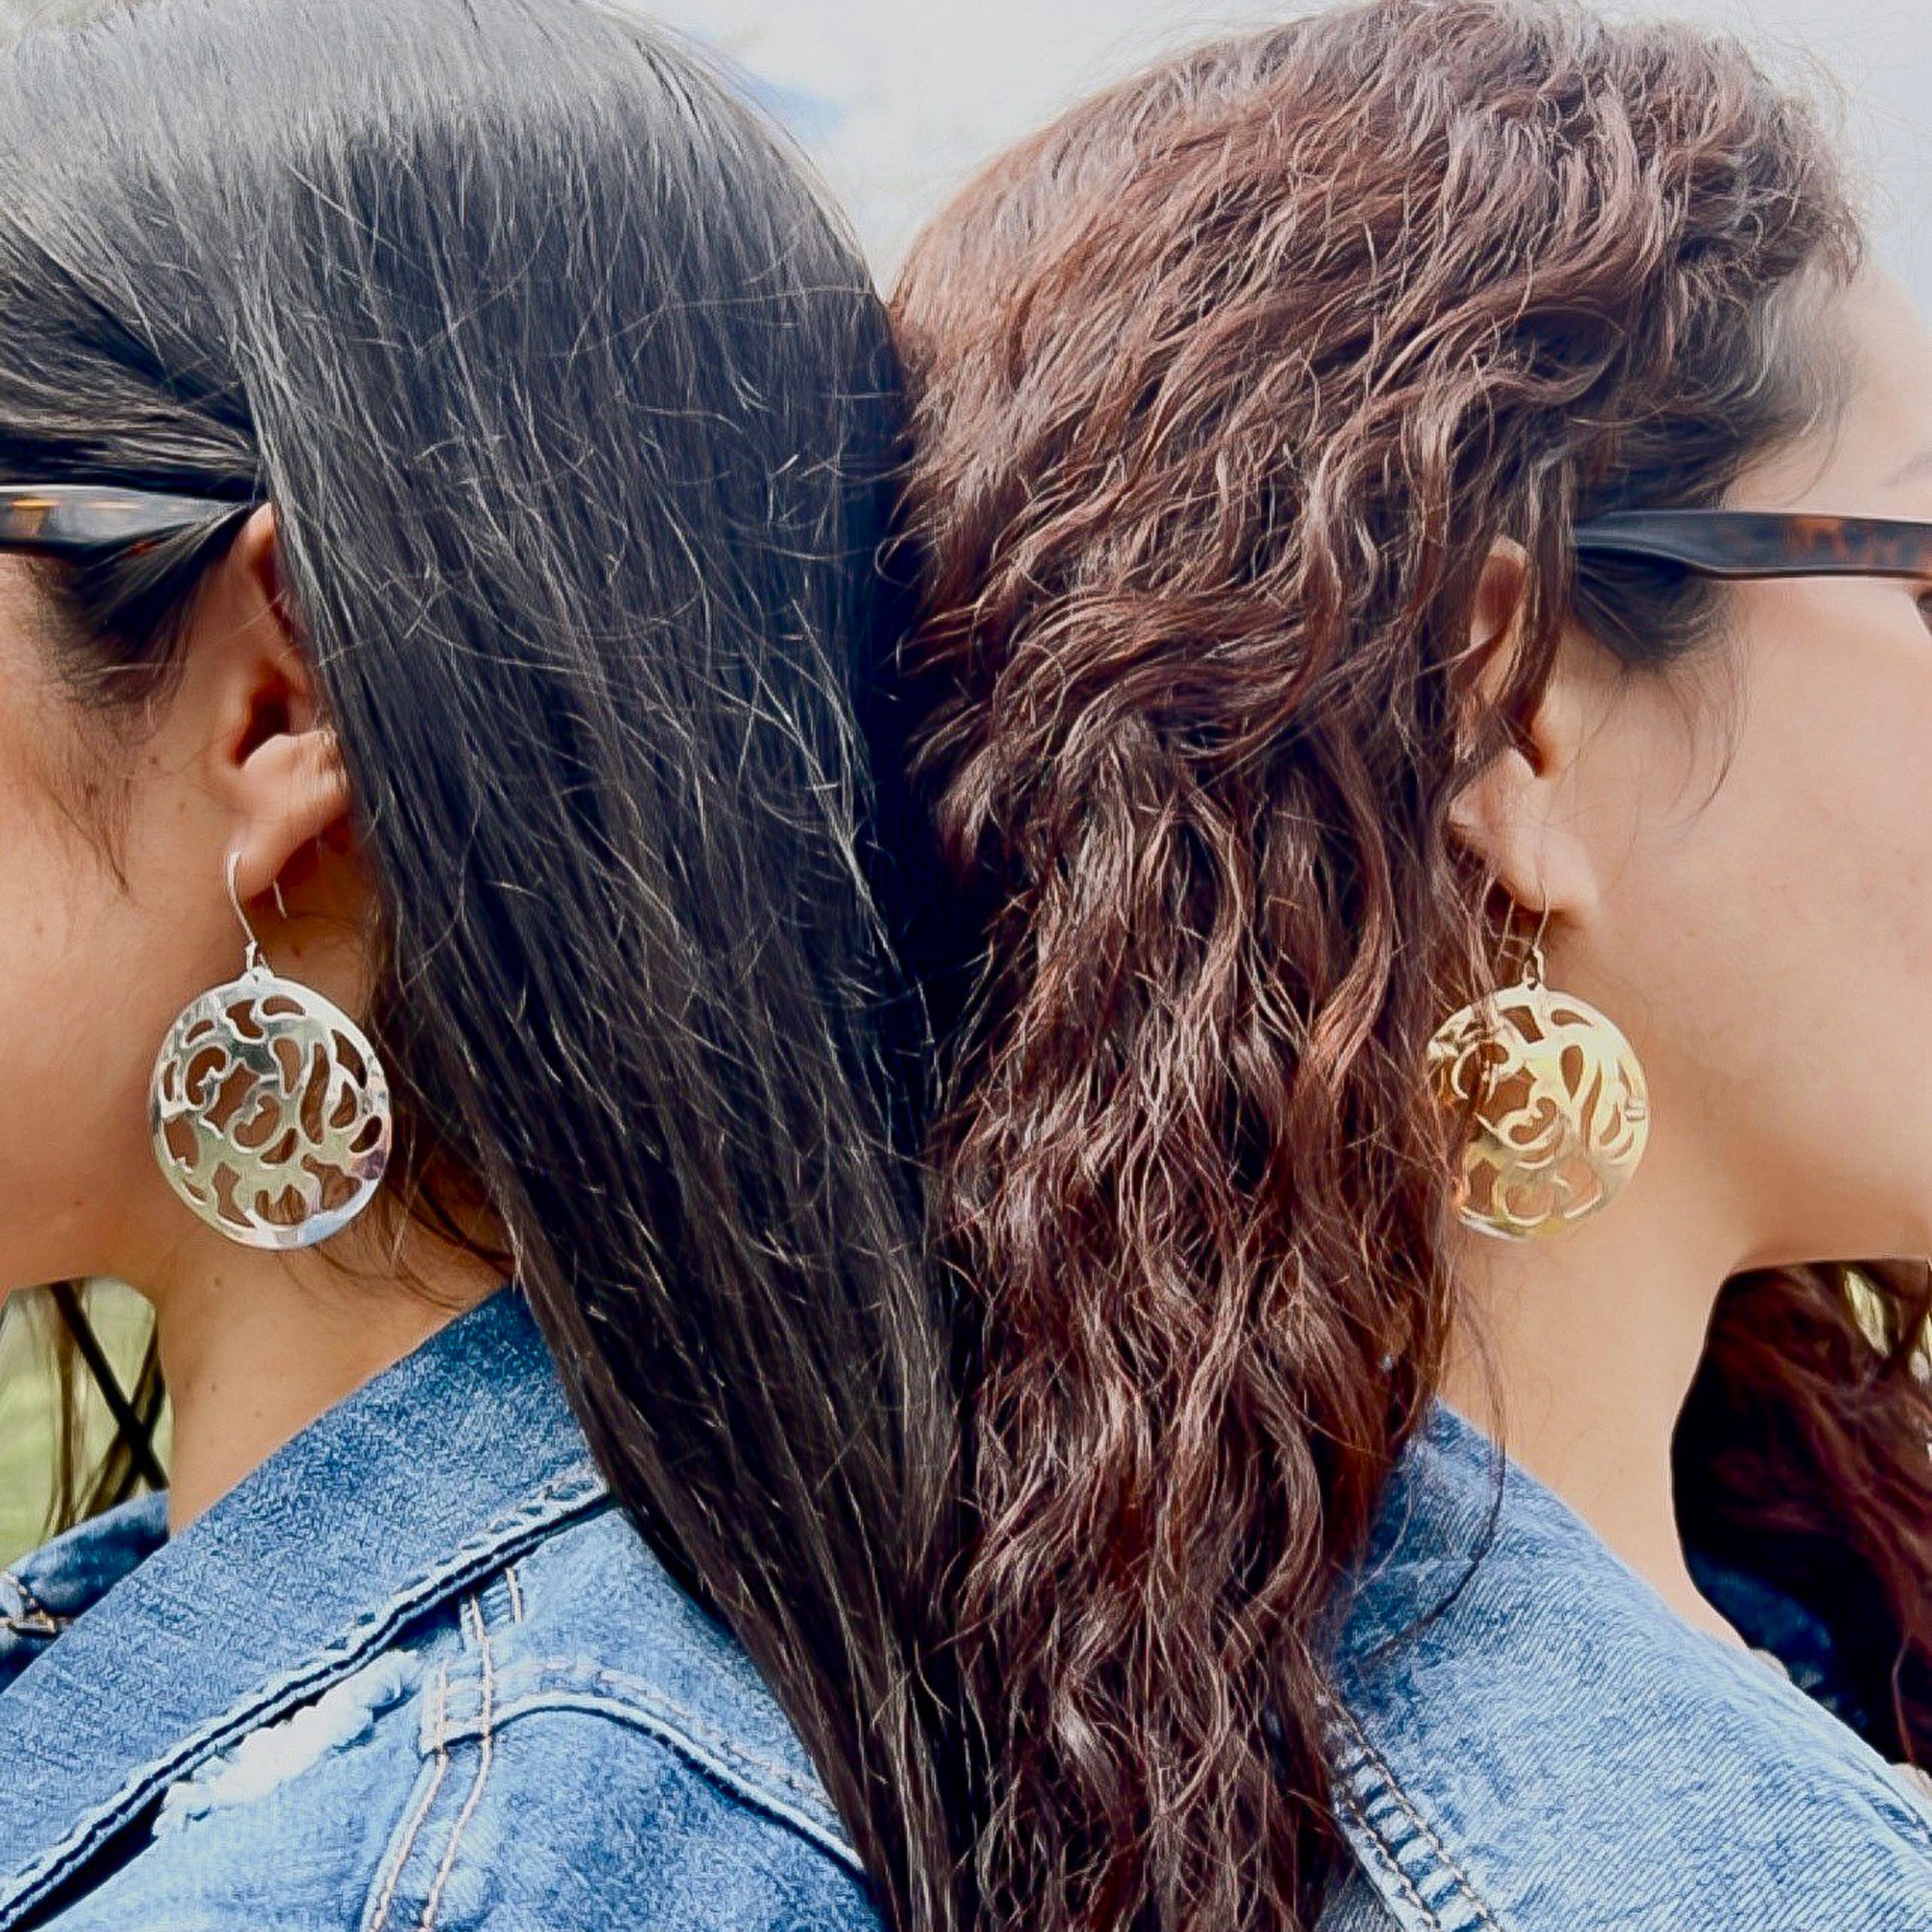 Alchemia Patterned Round Earrings | Charles Albert Jewelry